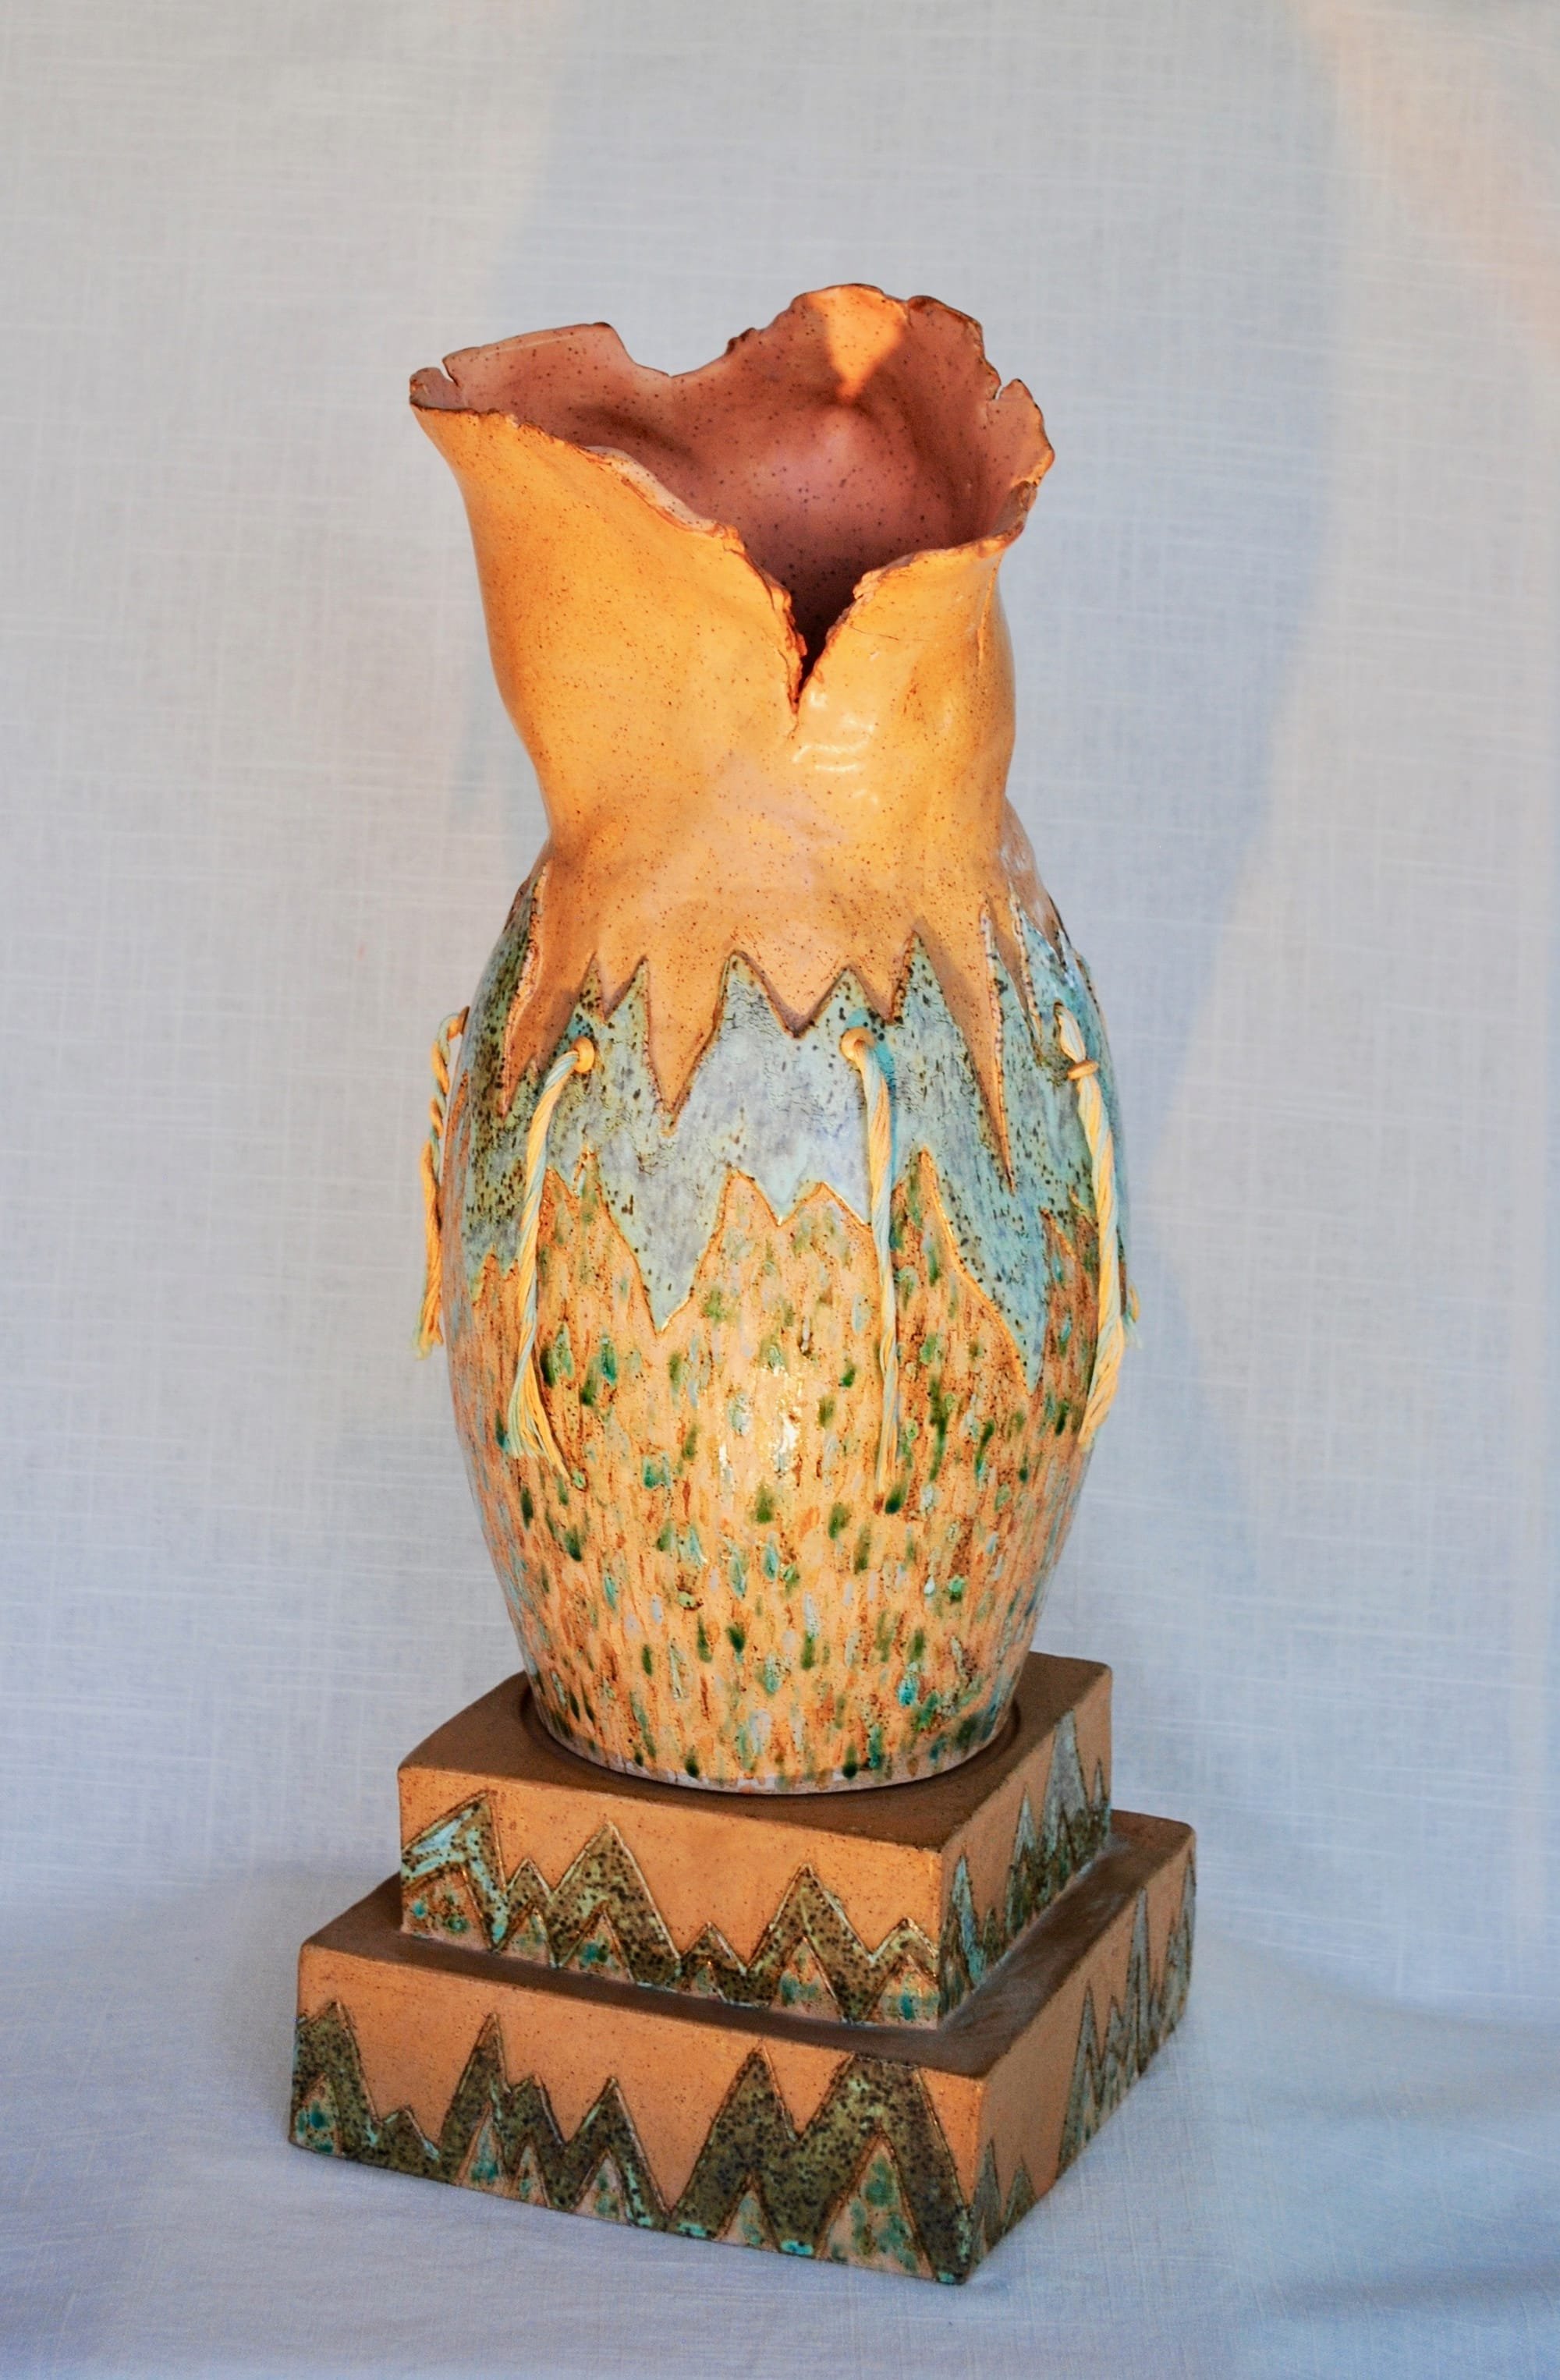 Gallery of unique art pieces - Pottery by Christen